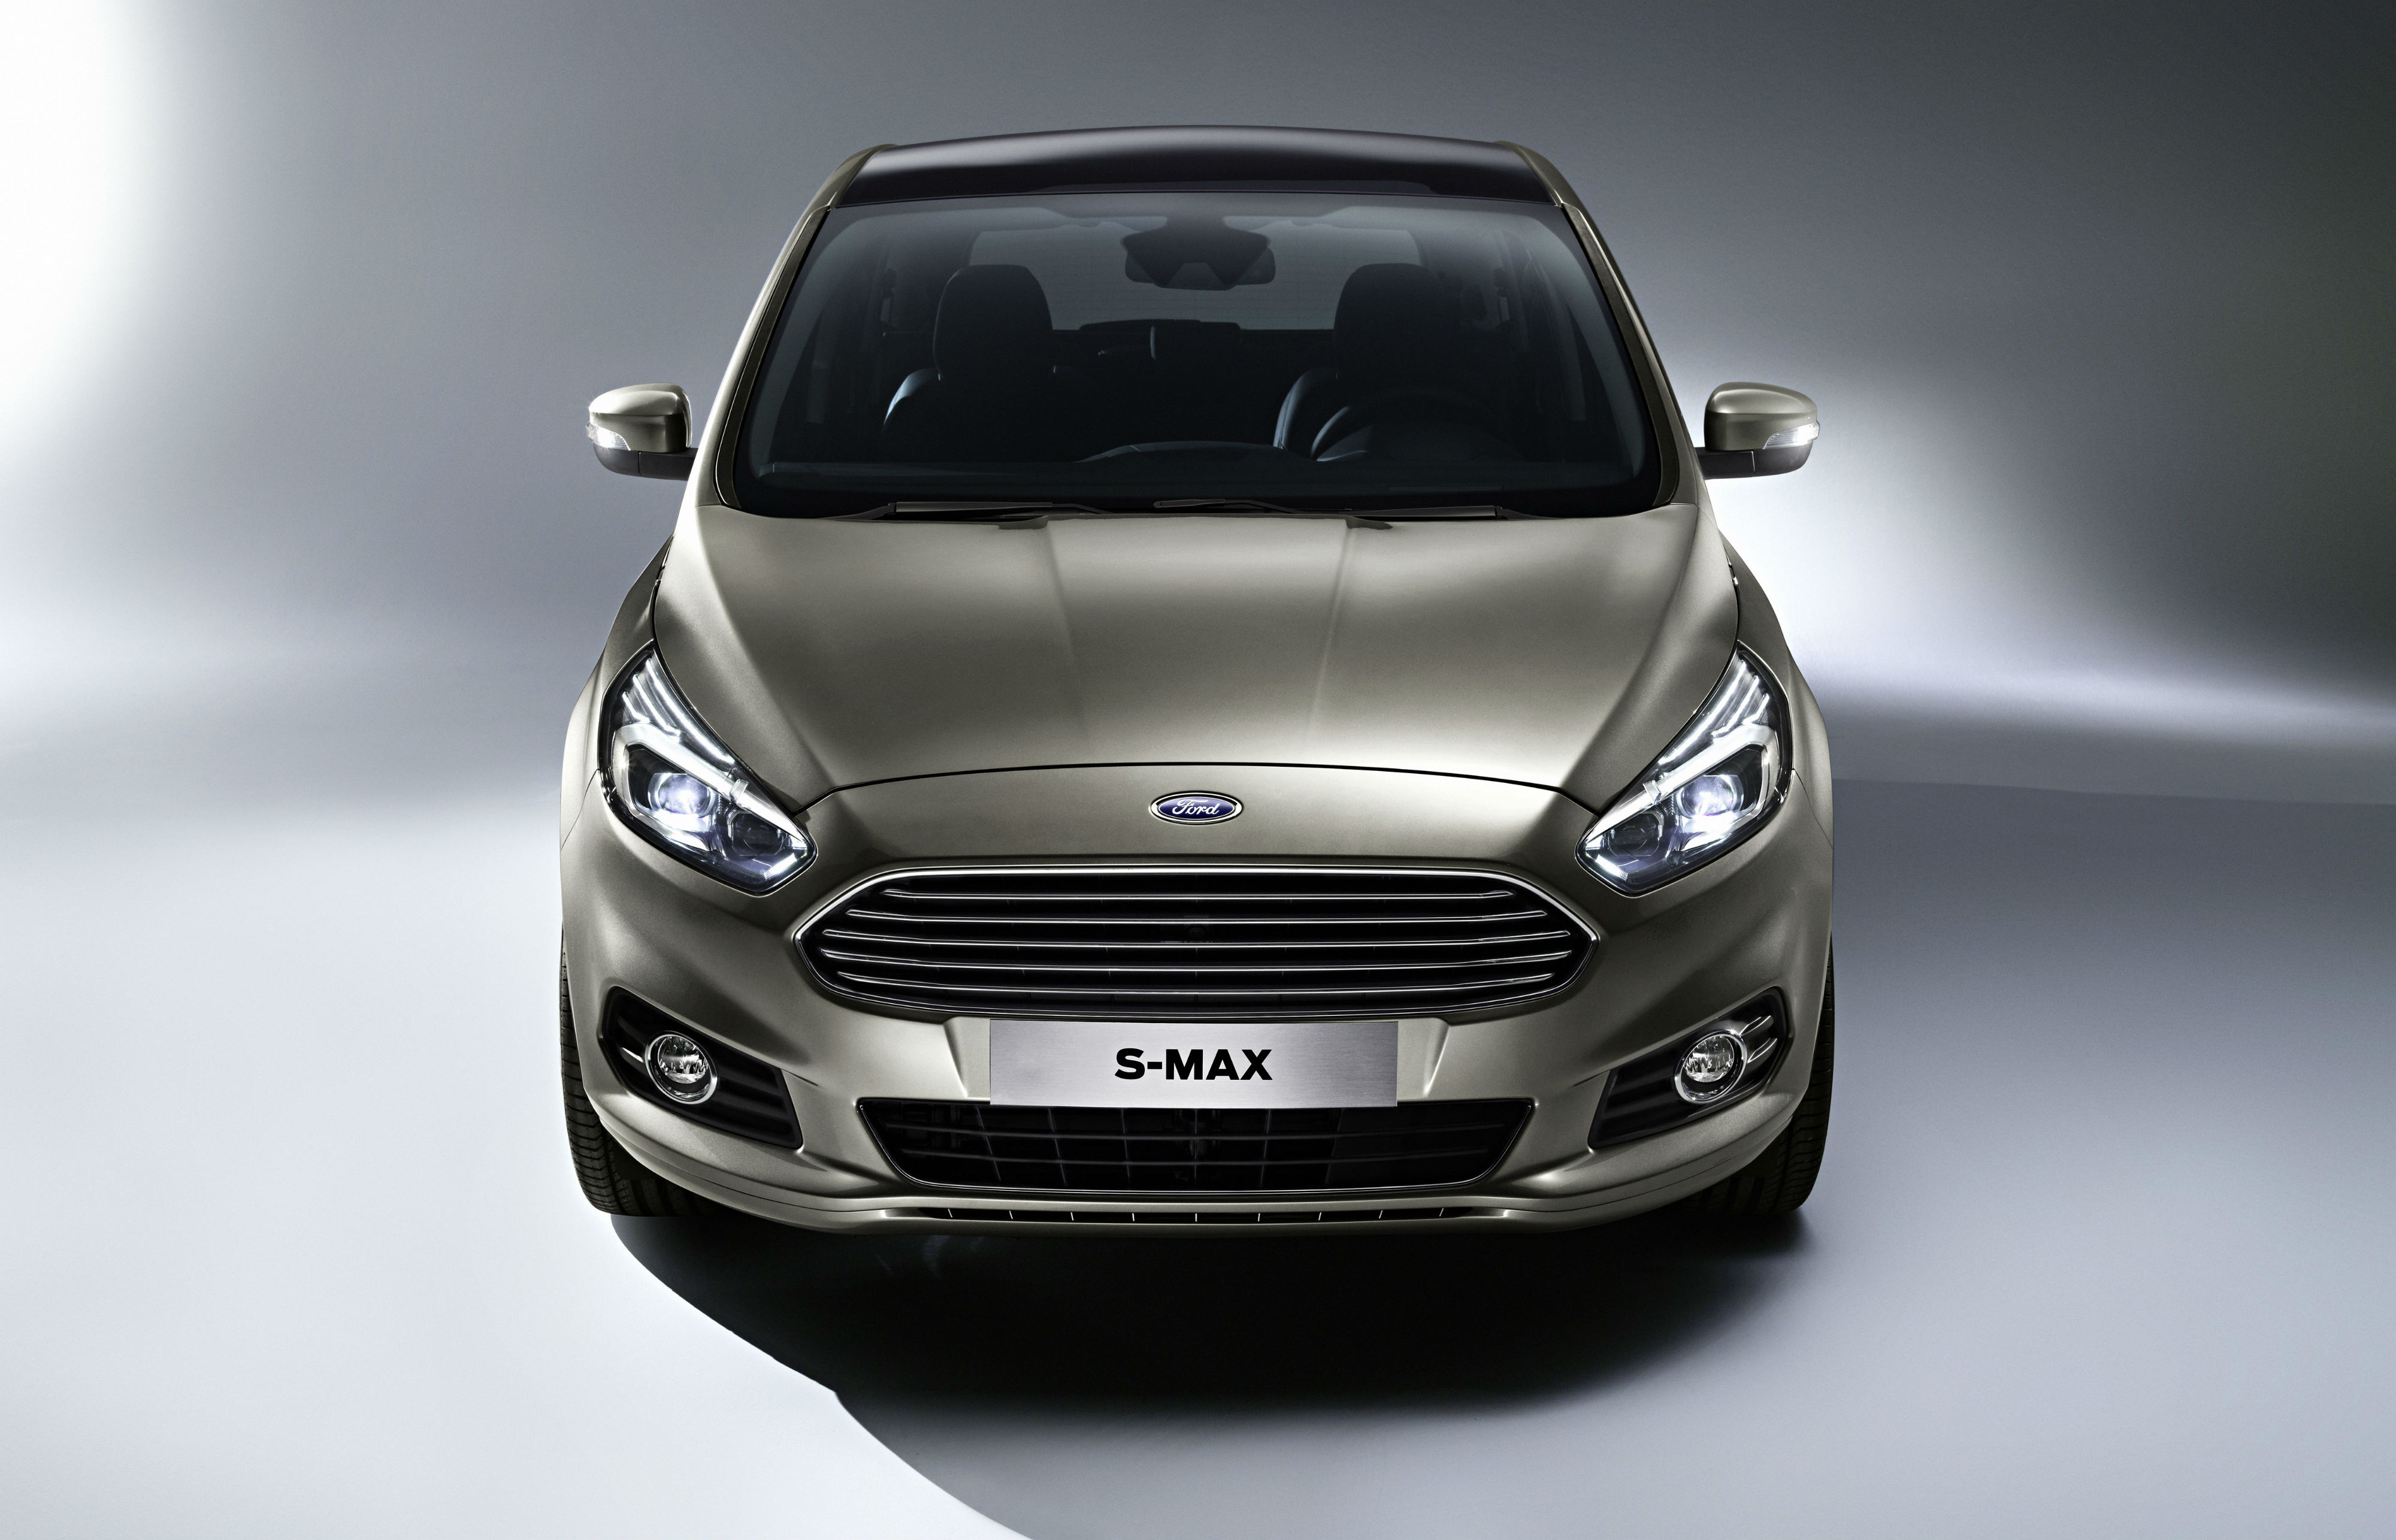 Ford S-Max 2015 engines